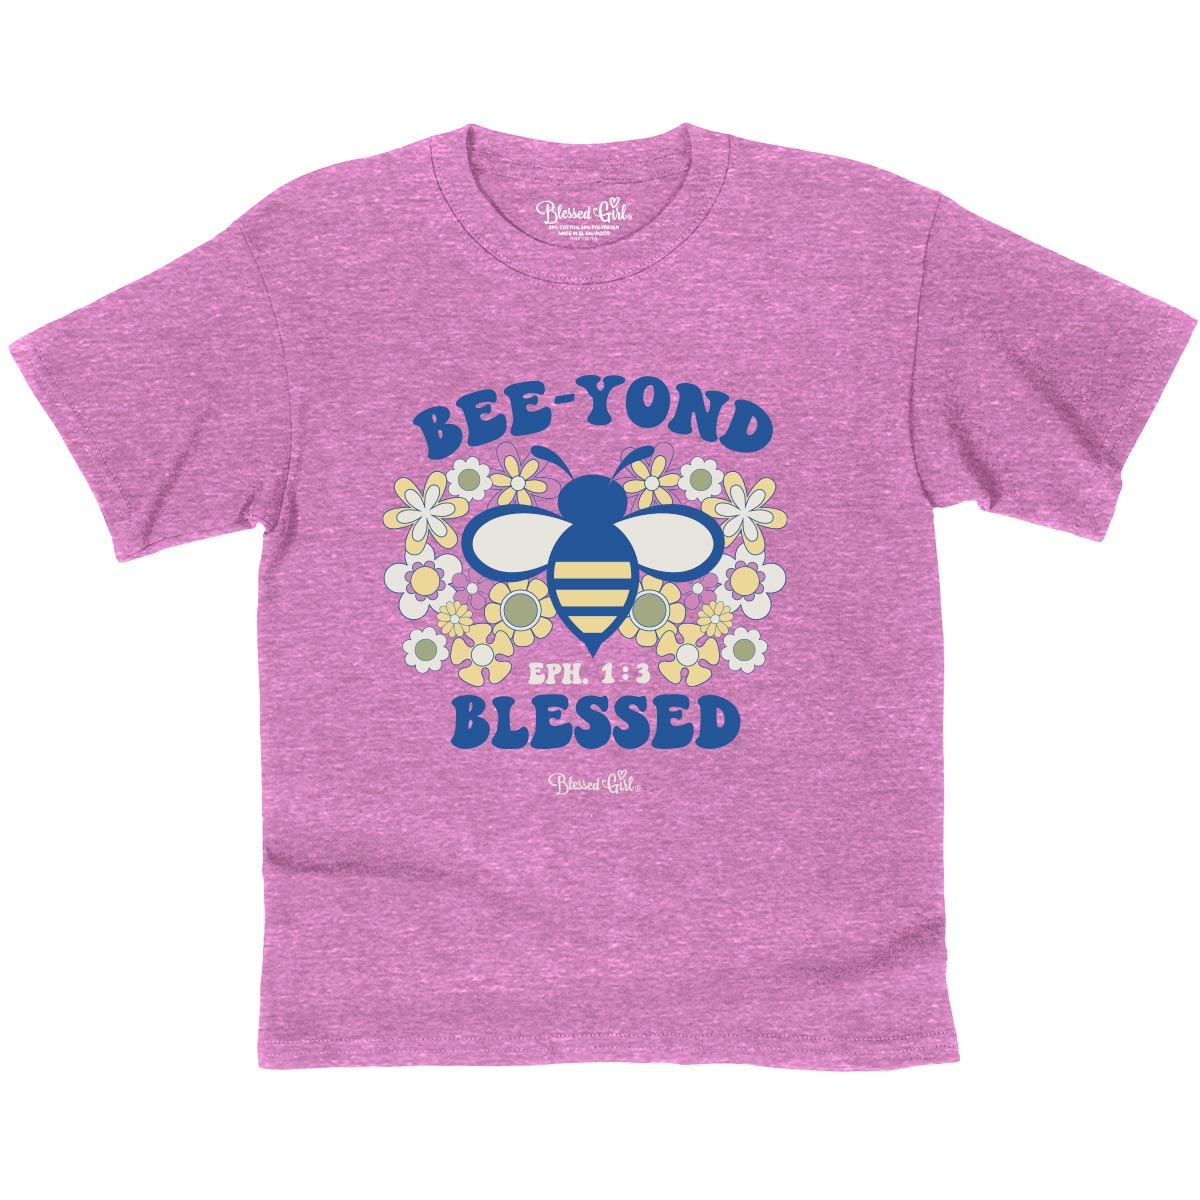 Blessed Girl Kids T-Shirt All You Need Is Love BeeYond